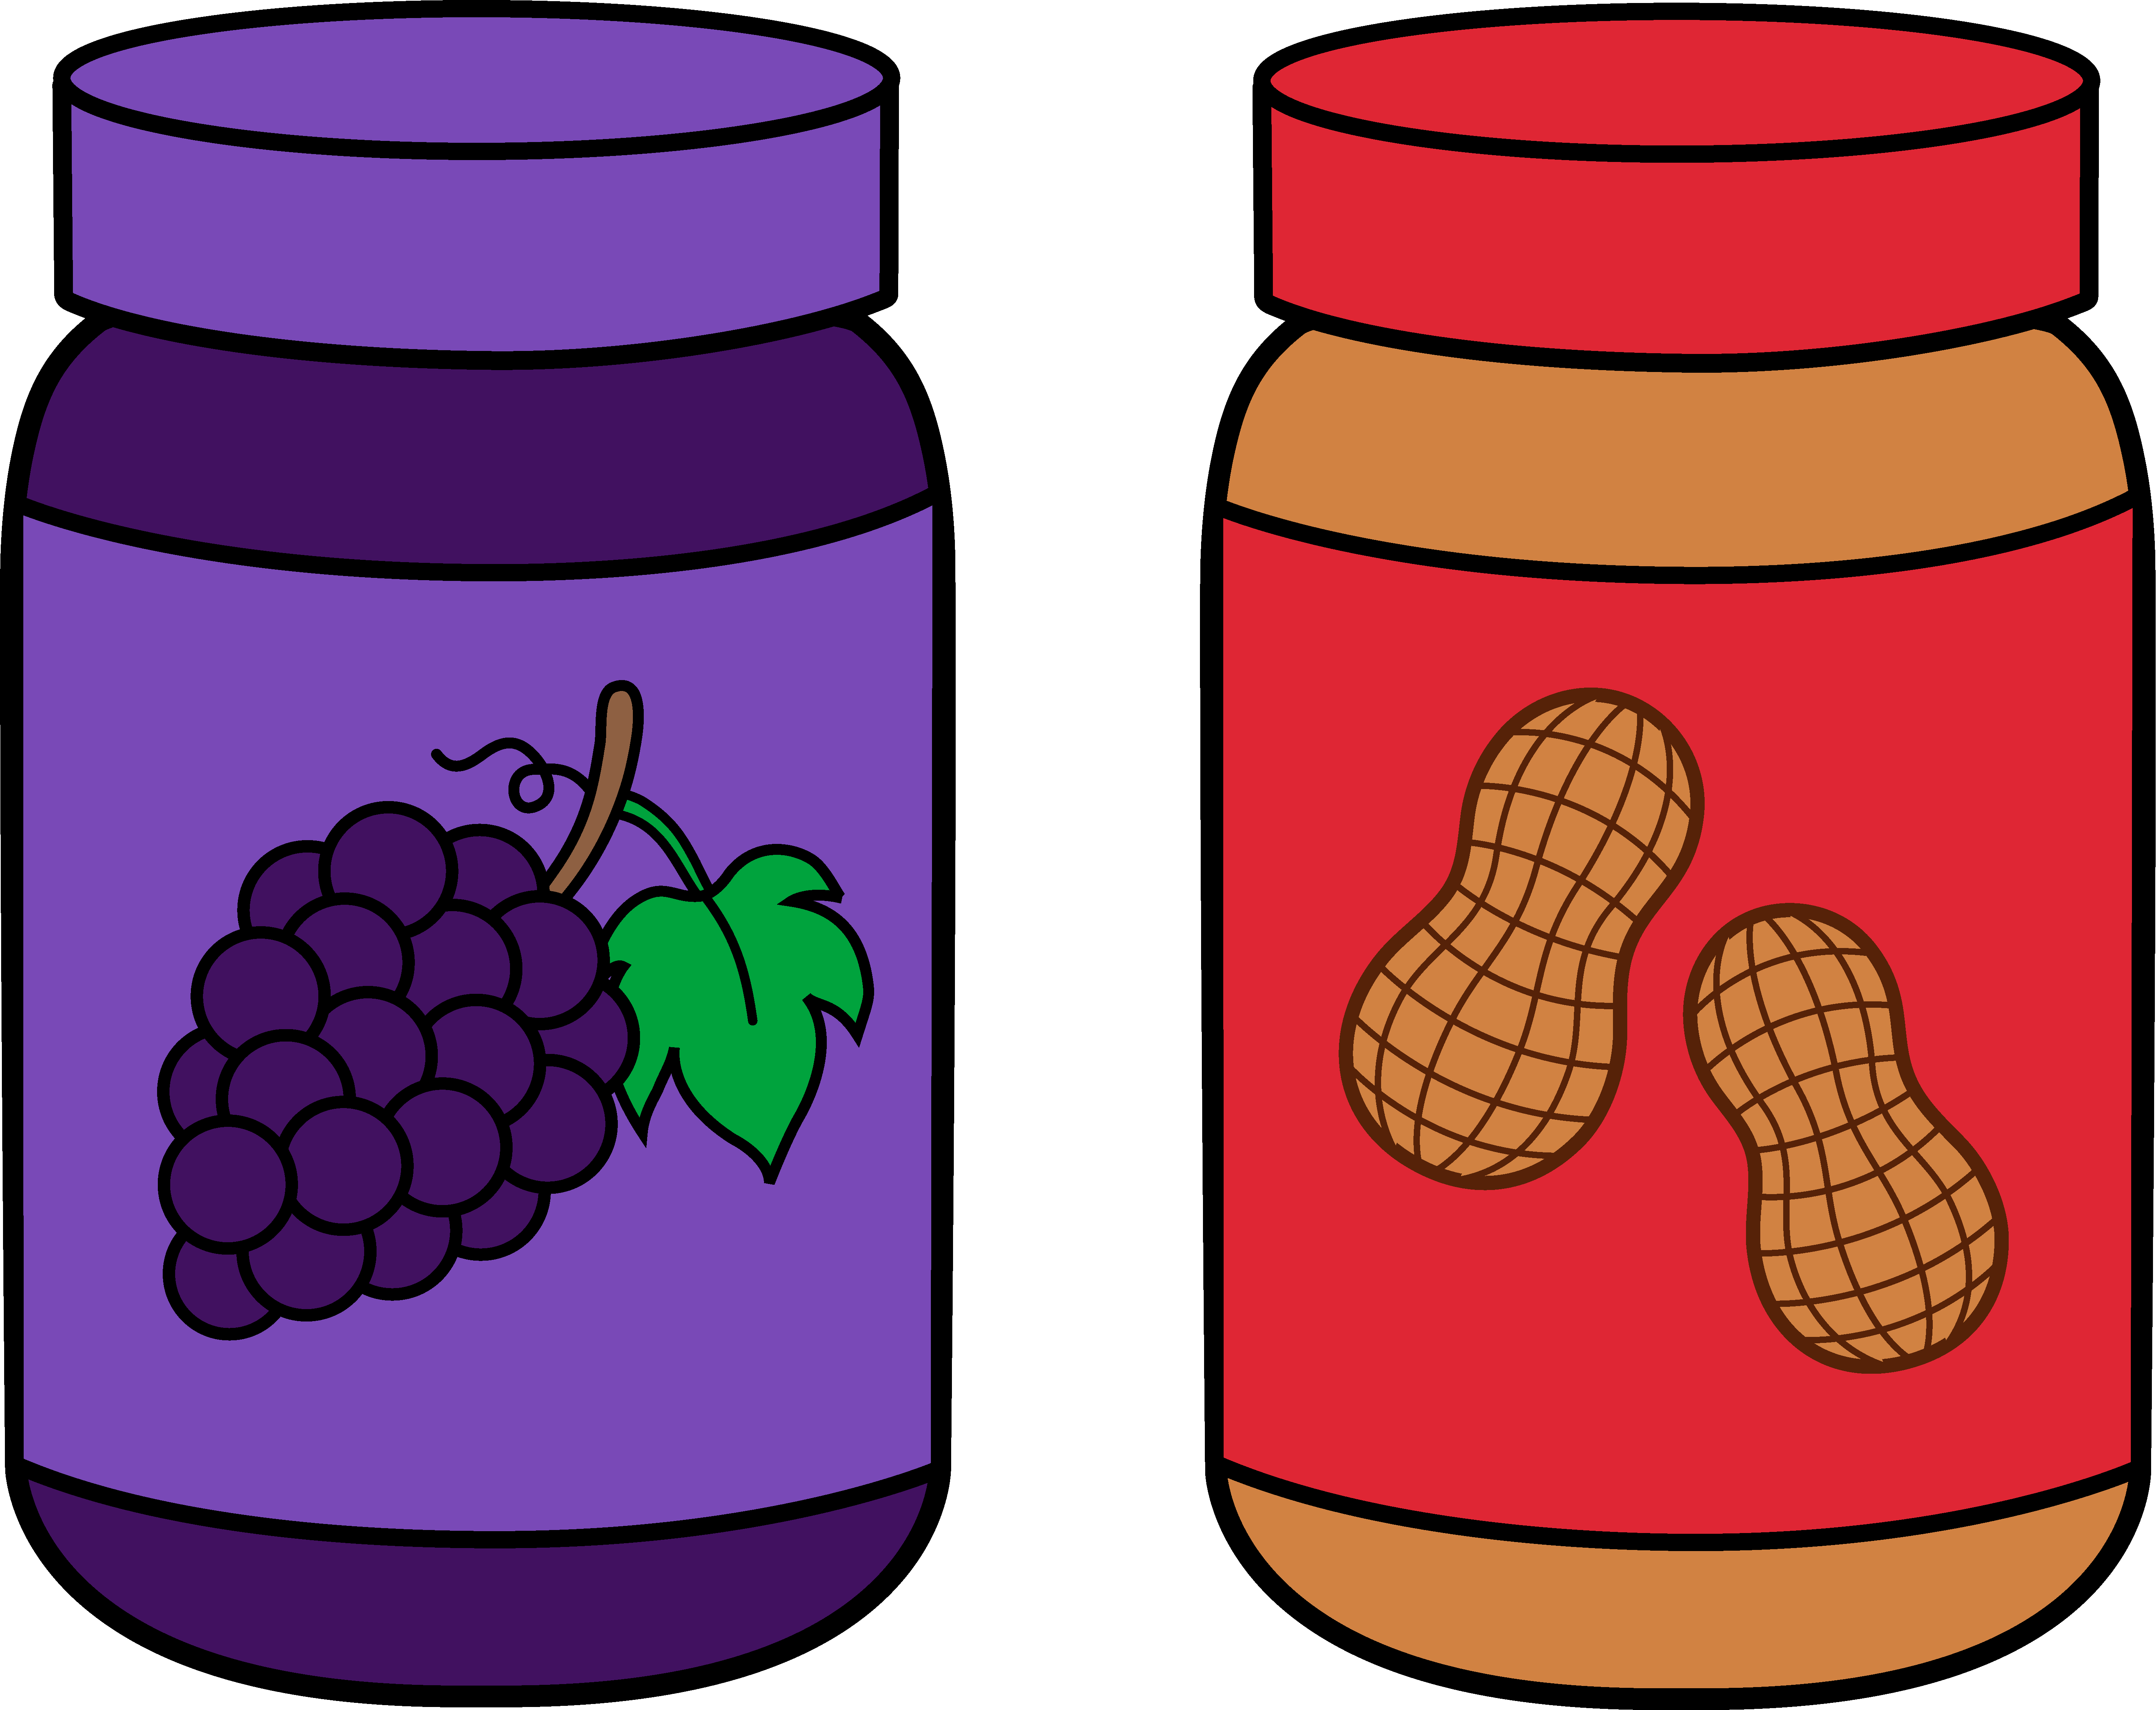 peanut clipart - Peanut Butter And Jelly Clip Art